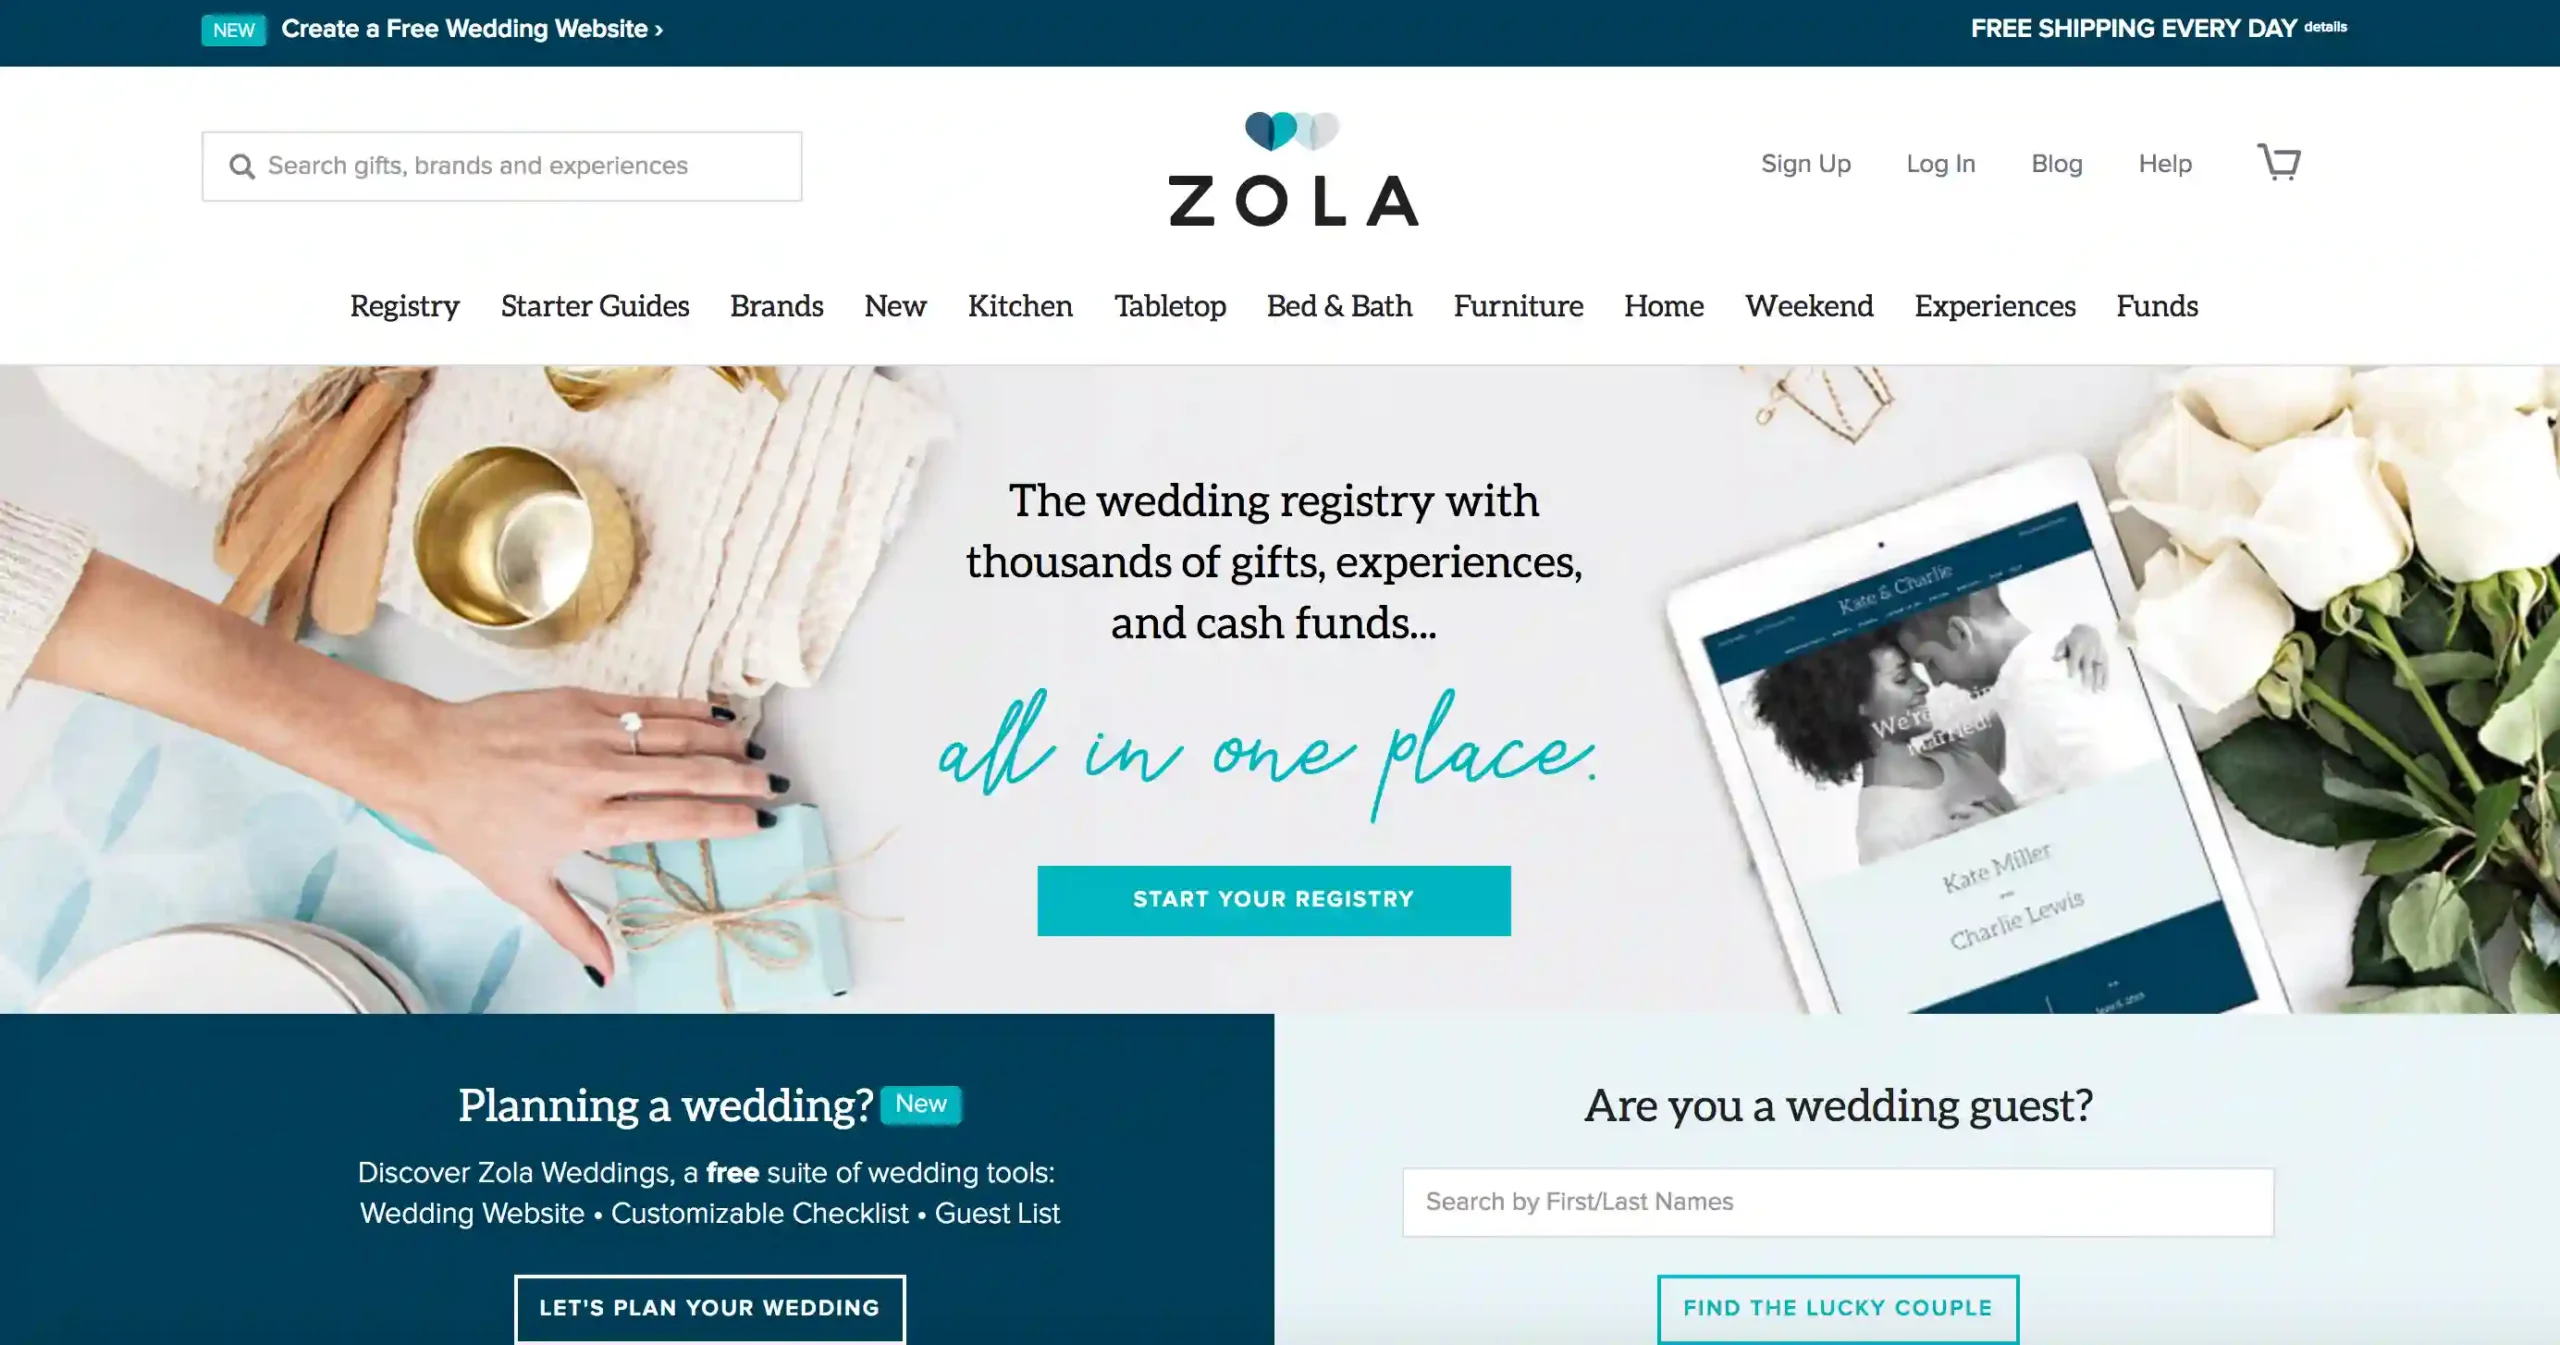 The Zola Wedding Website Search: Your Guide to Finding the Couple’s Registry